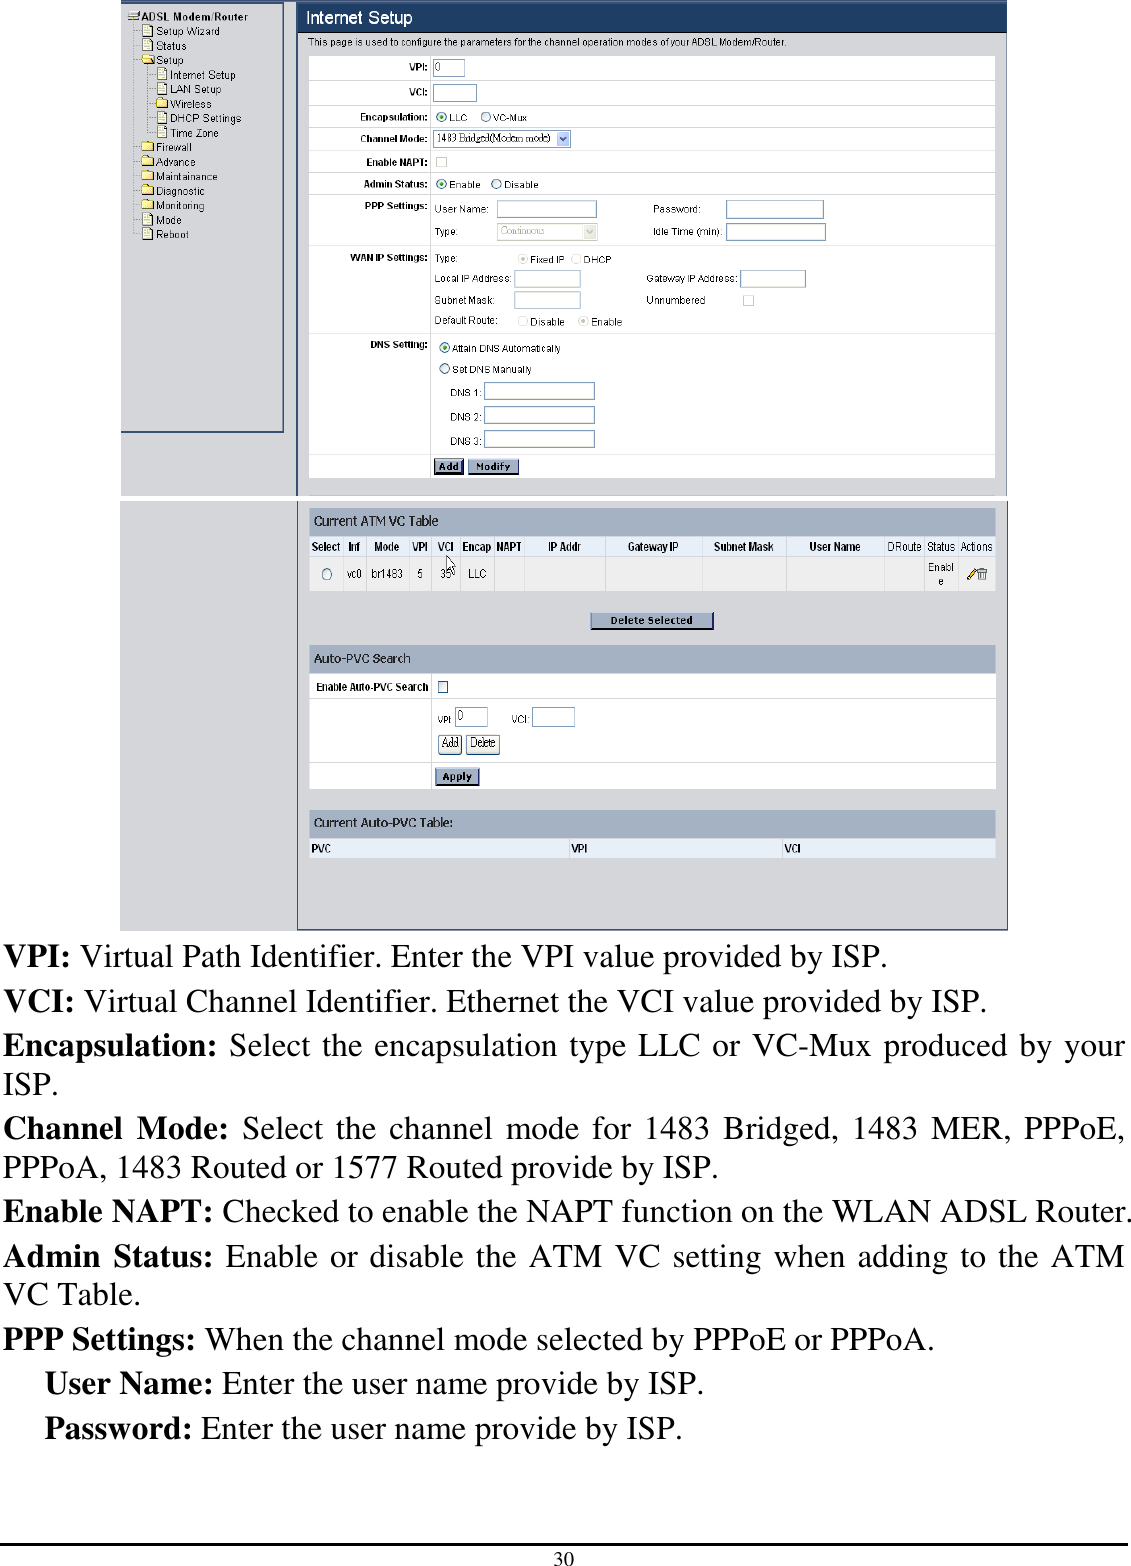 30   VPI: Virtual Path Identifier. Enter the VPI value provided by ISP. VCI: Virtual Channel Identifier. Ethernet the VCI value provided by ISP. Encapsulation: Select the encapsulation type LLC or VC-Mux produced by your ISP. Channel  Mode: Select the channel mode for 1483 Bridged, 1483 MER, PPPoE, PPPoA, 1483 Routed or 1577 Routed provide by ISP. Enable NAPT: Checked to enable the NAPT function on the WLAN ADSL Router. Admin Status: Enable or disable the ATM VC setting when adding to the ATM VC Table. PPP Settings: When the channel mode selected by PPPoE or PPPoA. User Name: Enter the user name provide by ISP. Password: Enter the user name provide by ISP. 